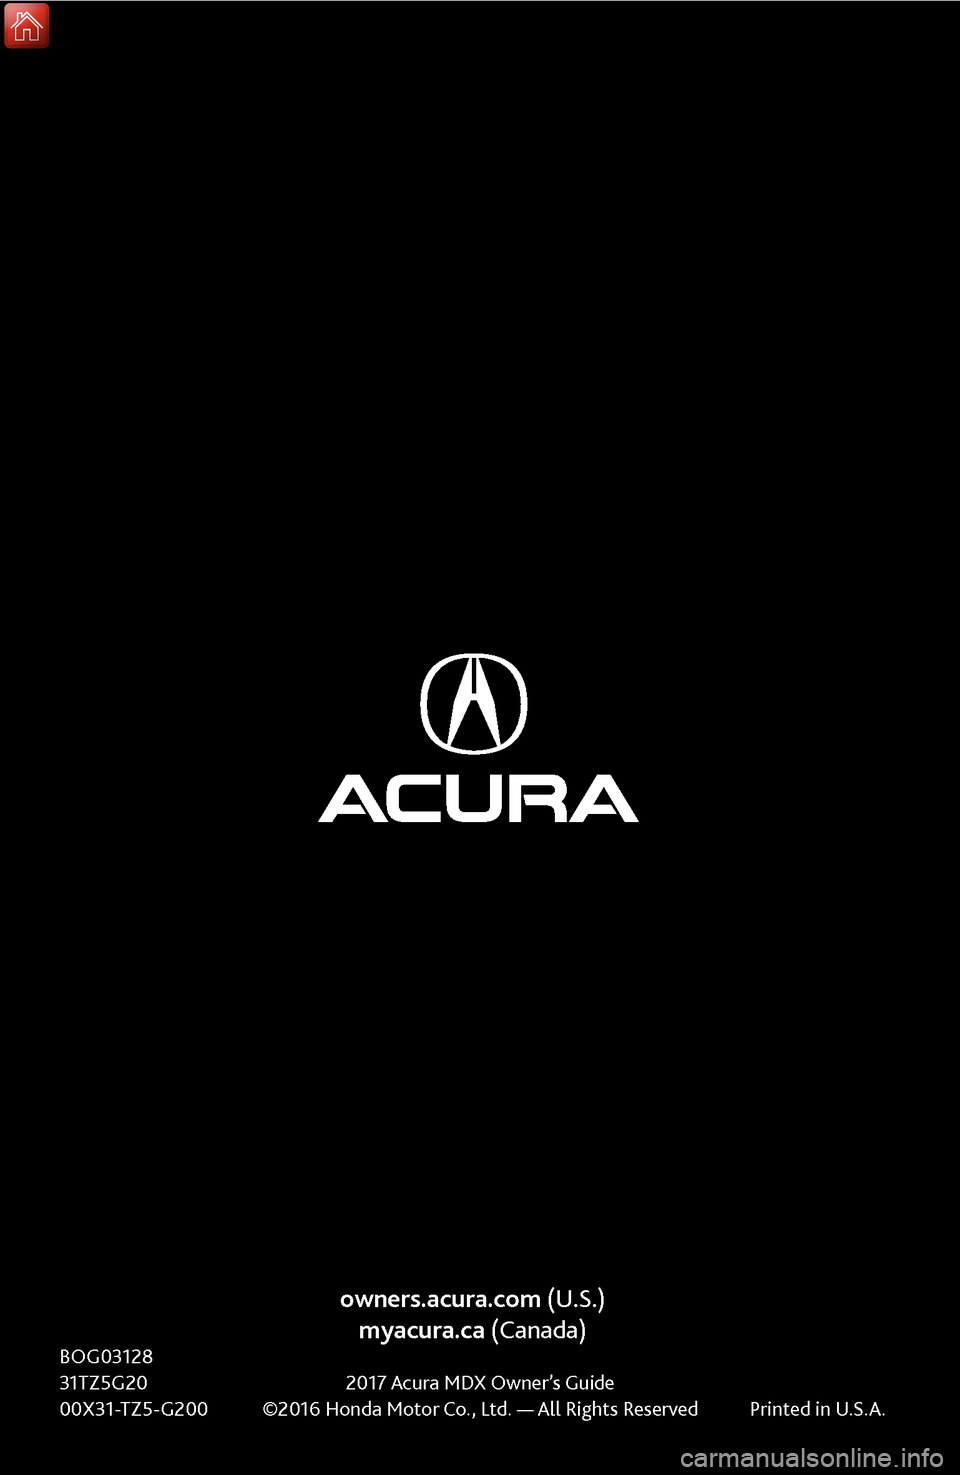 Acura MDX 2017  Owners Guide owners.acura.com (U.S.)myacura.ca (Canada)
BOG03128 31TZ5G20 2017 Acura 
MDX Owner’s Guide
00X31-TZ5-G200
 ©2016 Honda Motor Co., Ltd. — 

All Rights Reserved
 Printed in U.S.A
 . 